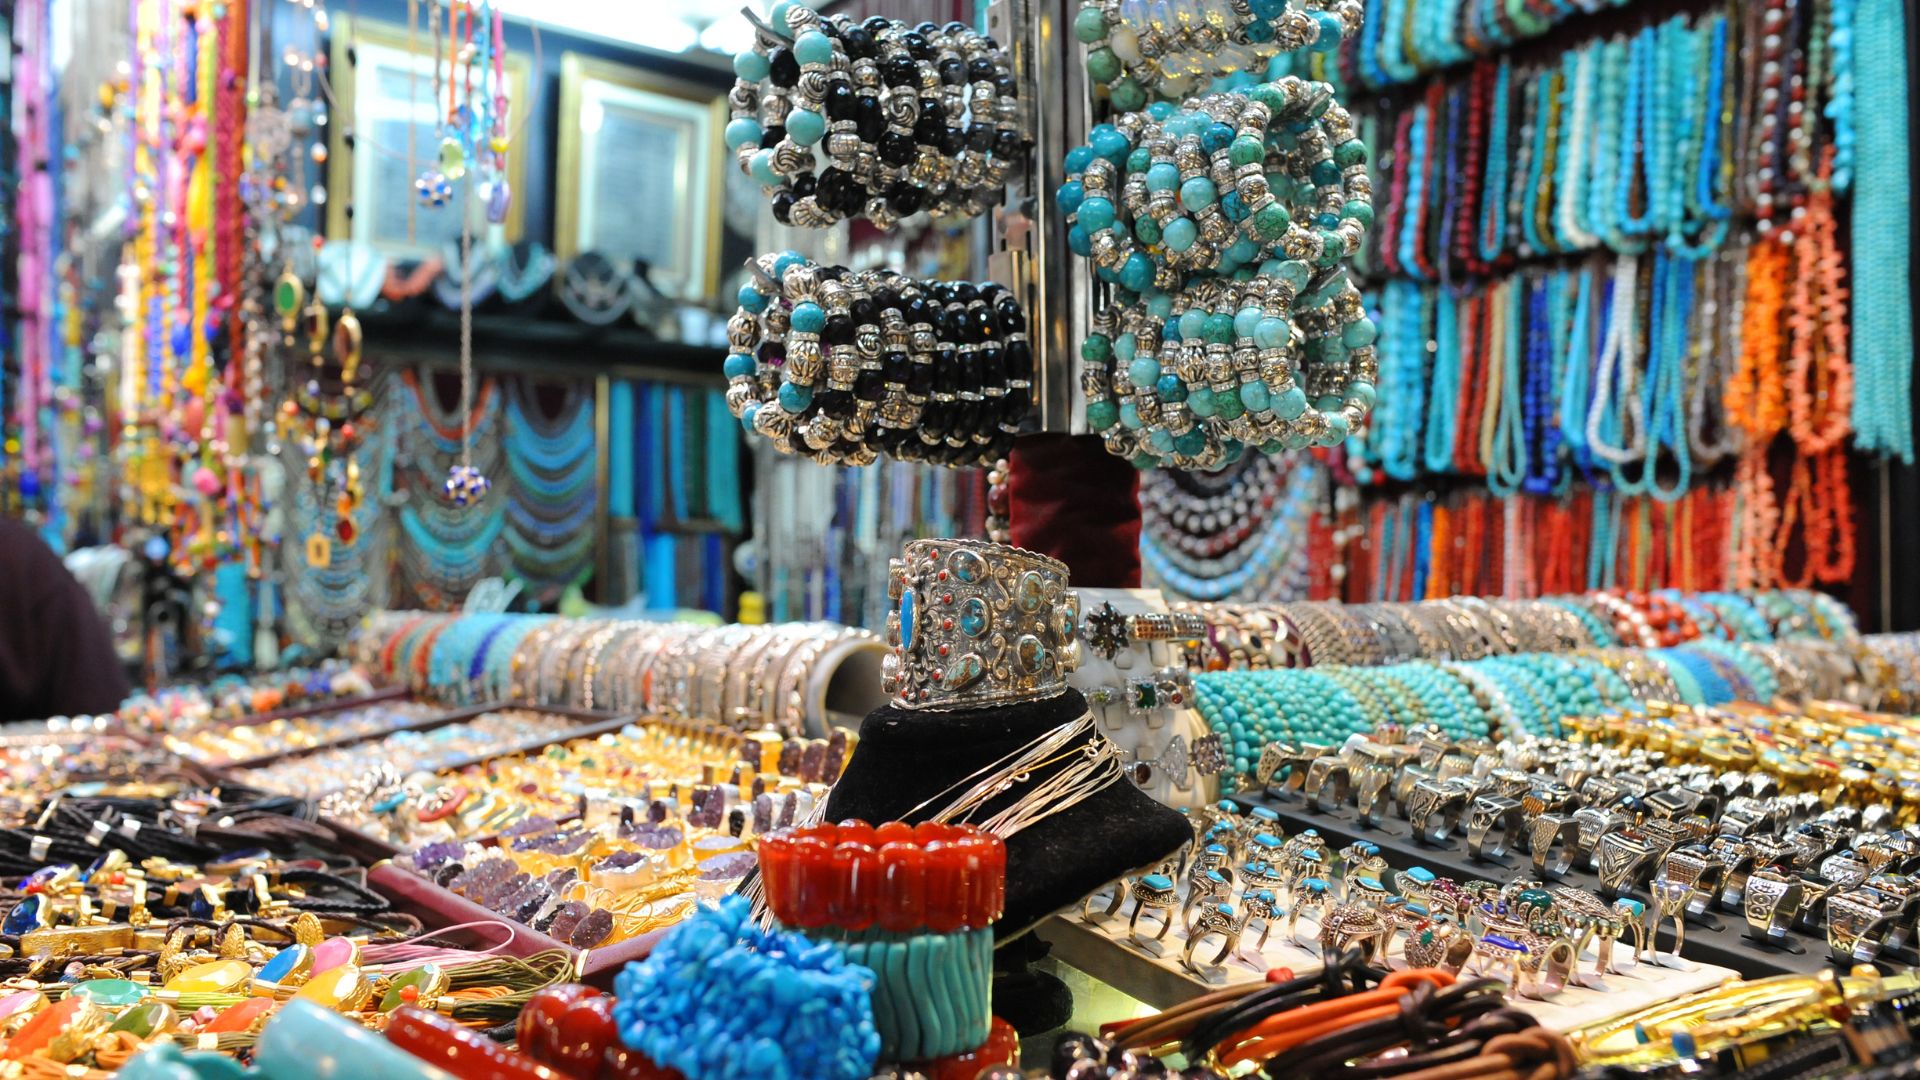 Grand Bazaar in Istanbul City Center - Tours and Activities